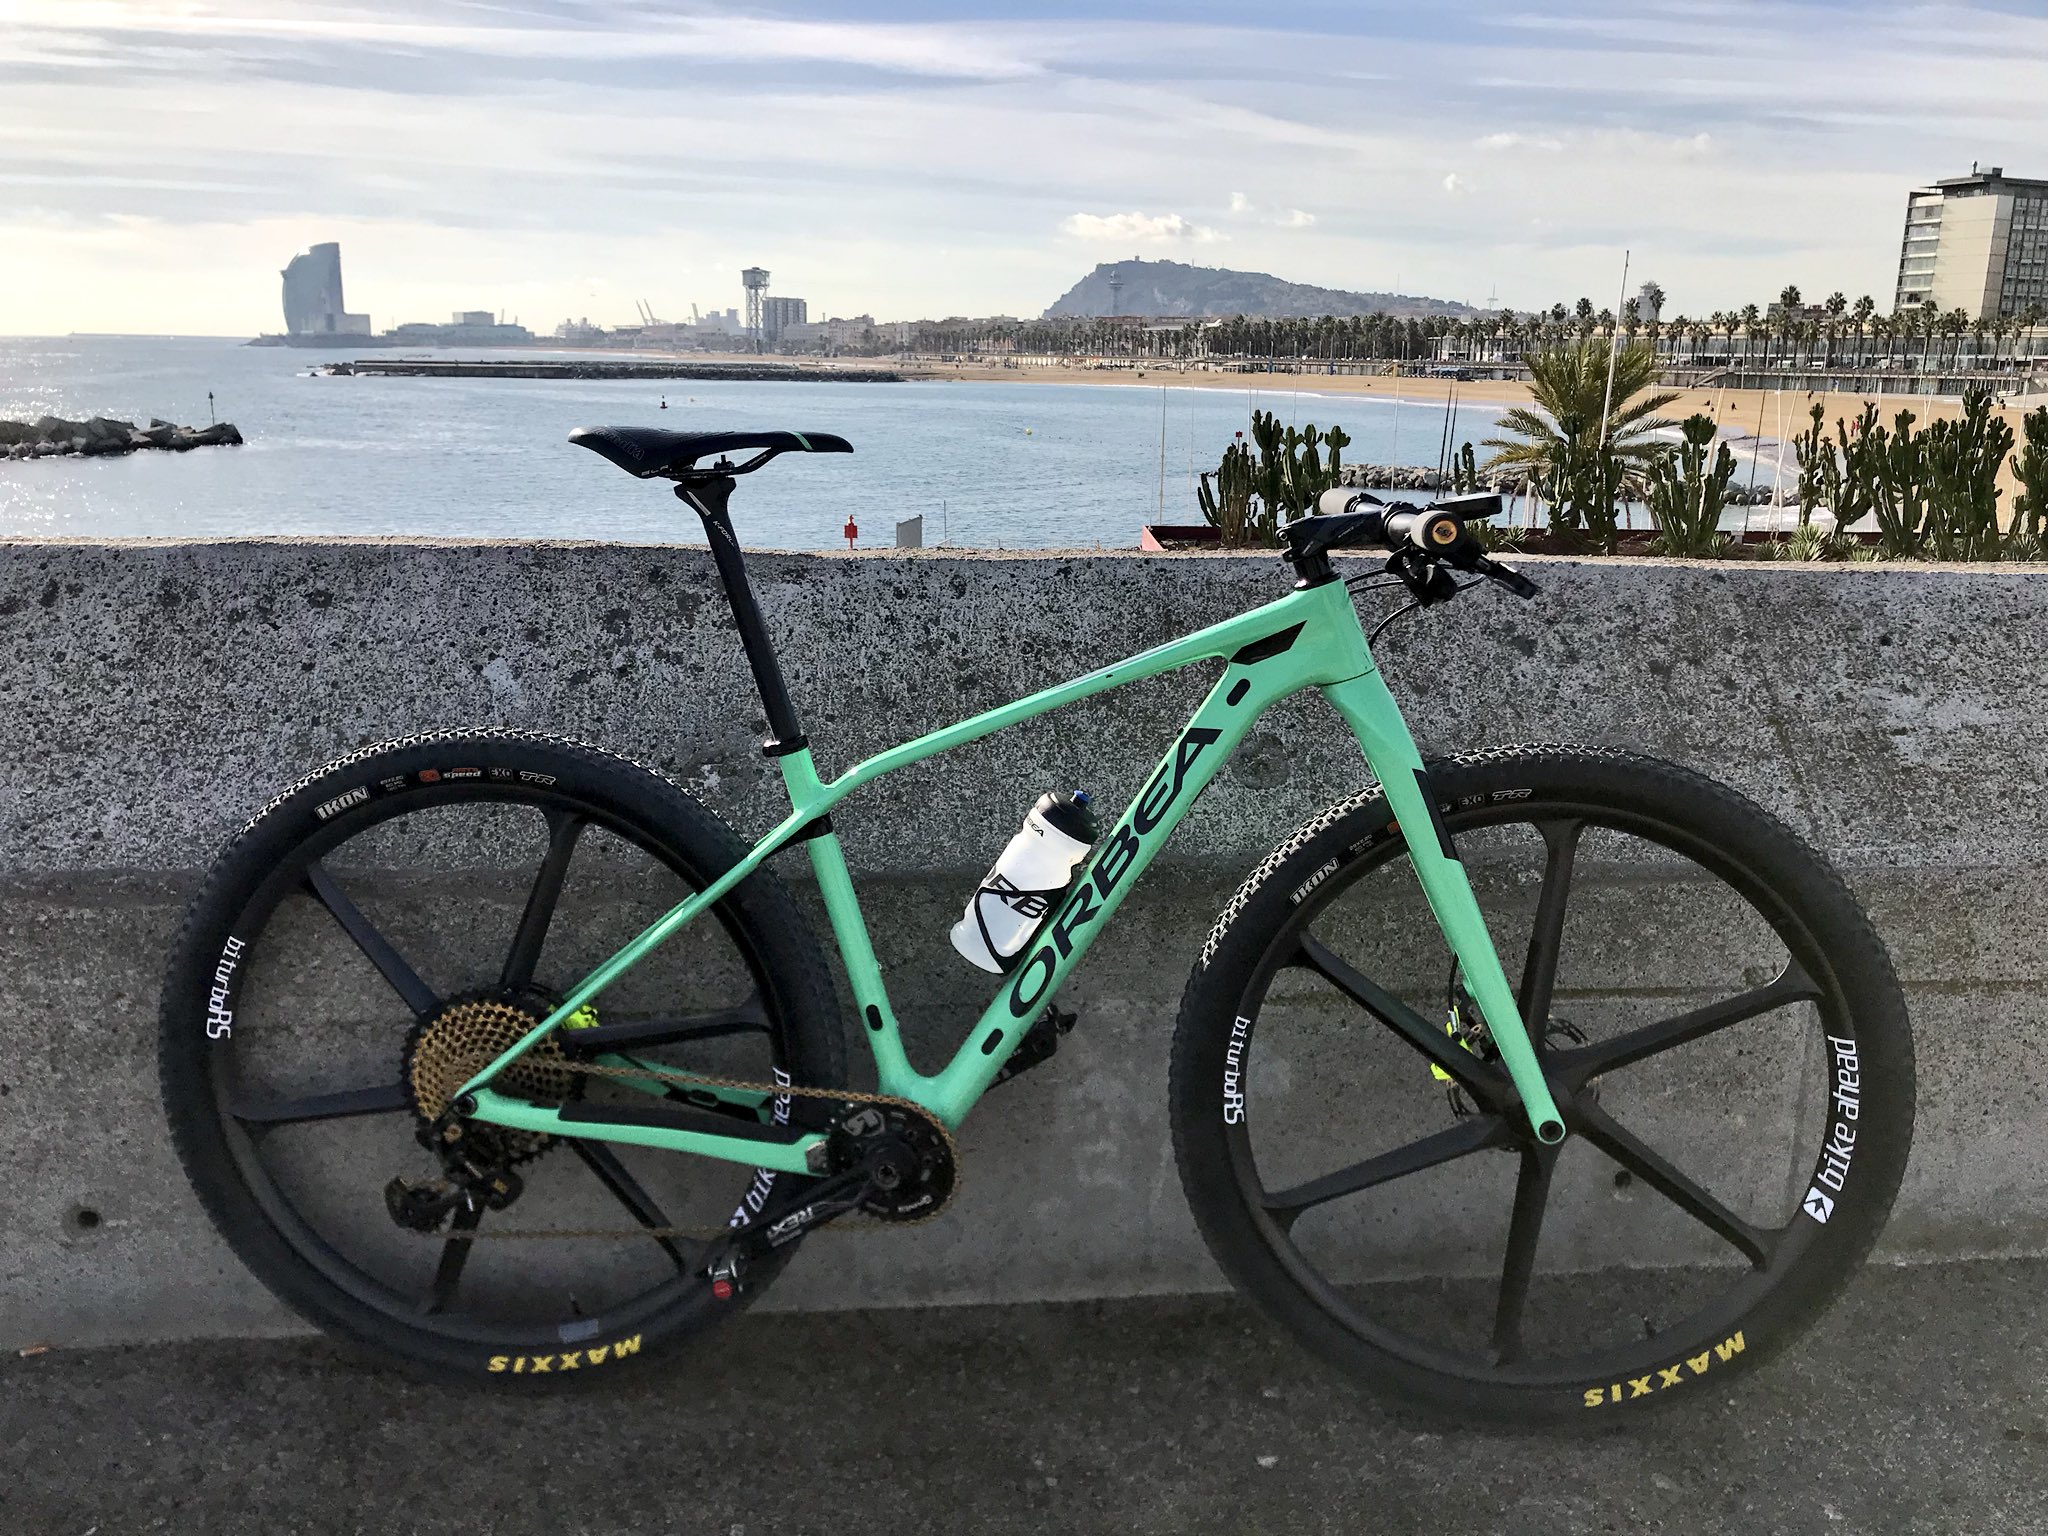 Twitter 上的 Aleix Espargaró："Sin duda, mi bici Os gusta? / My favourite bicycle without any doubt! Do u guys like? @Orbea https://t.co/I4gYTppq9o" / Twitter